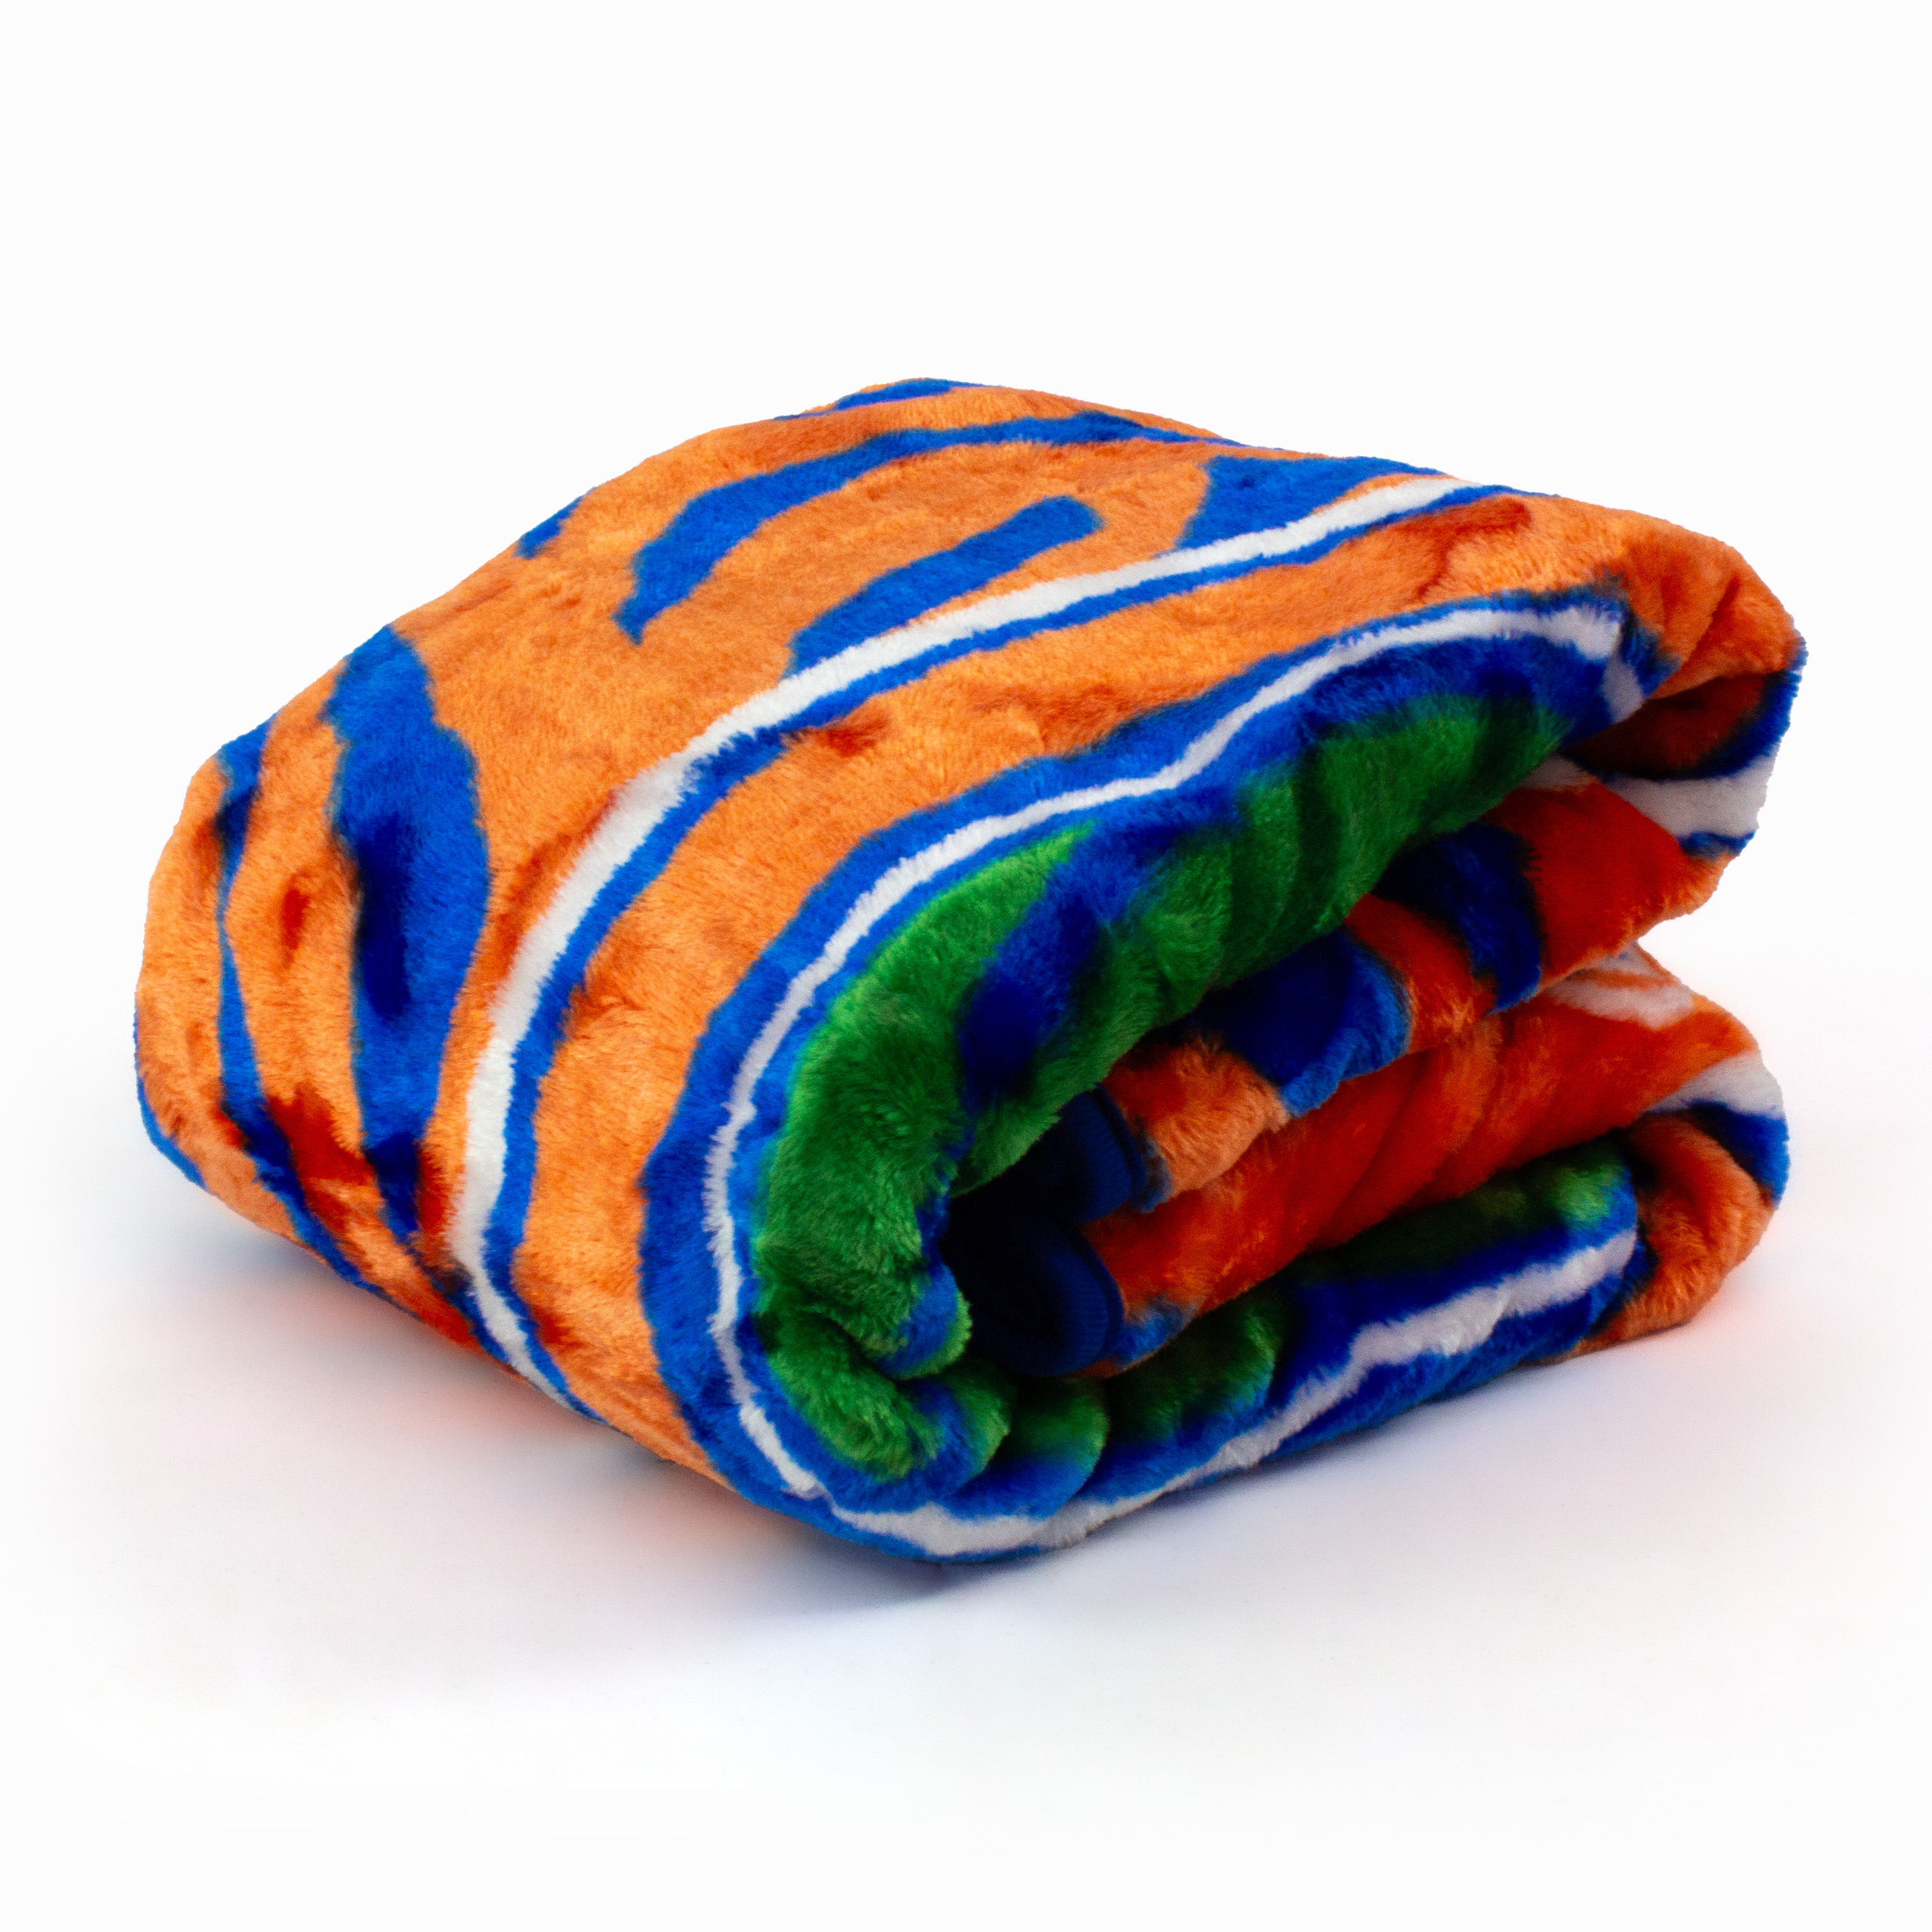 College Covers Everything Comfy Florida Gators Soft Raschel Throw Blanket, 60" x 50" - image 4 of 6